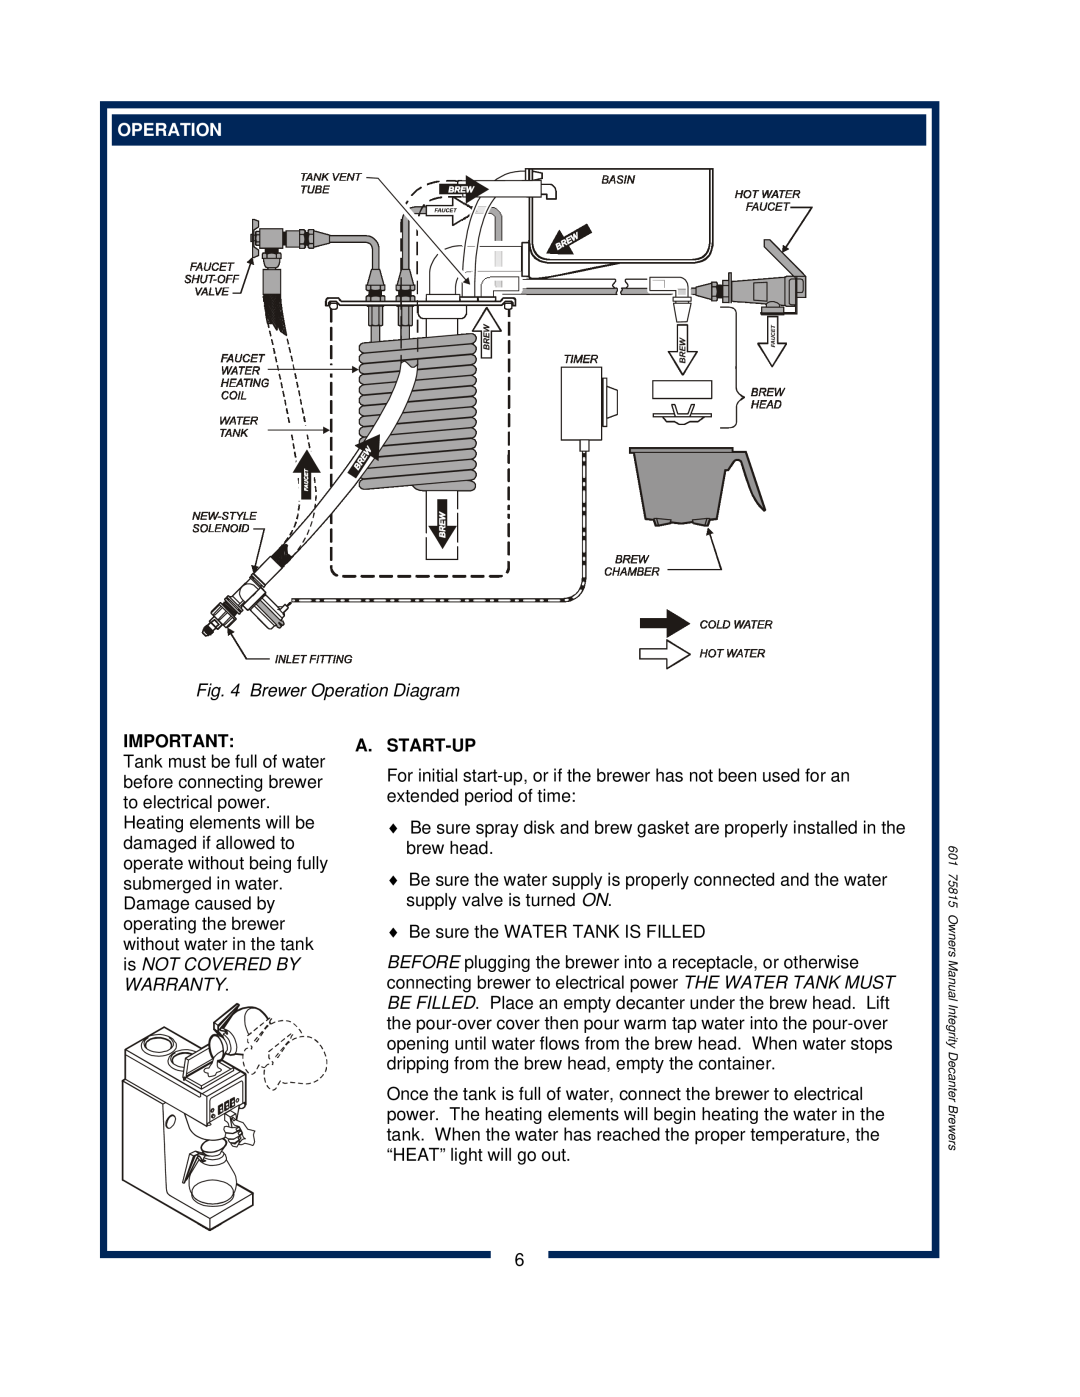 Bloomfield 9012, 9010, 9016 owner manual Brewer Operation Diagram, A.Start-Up 